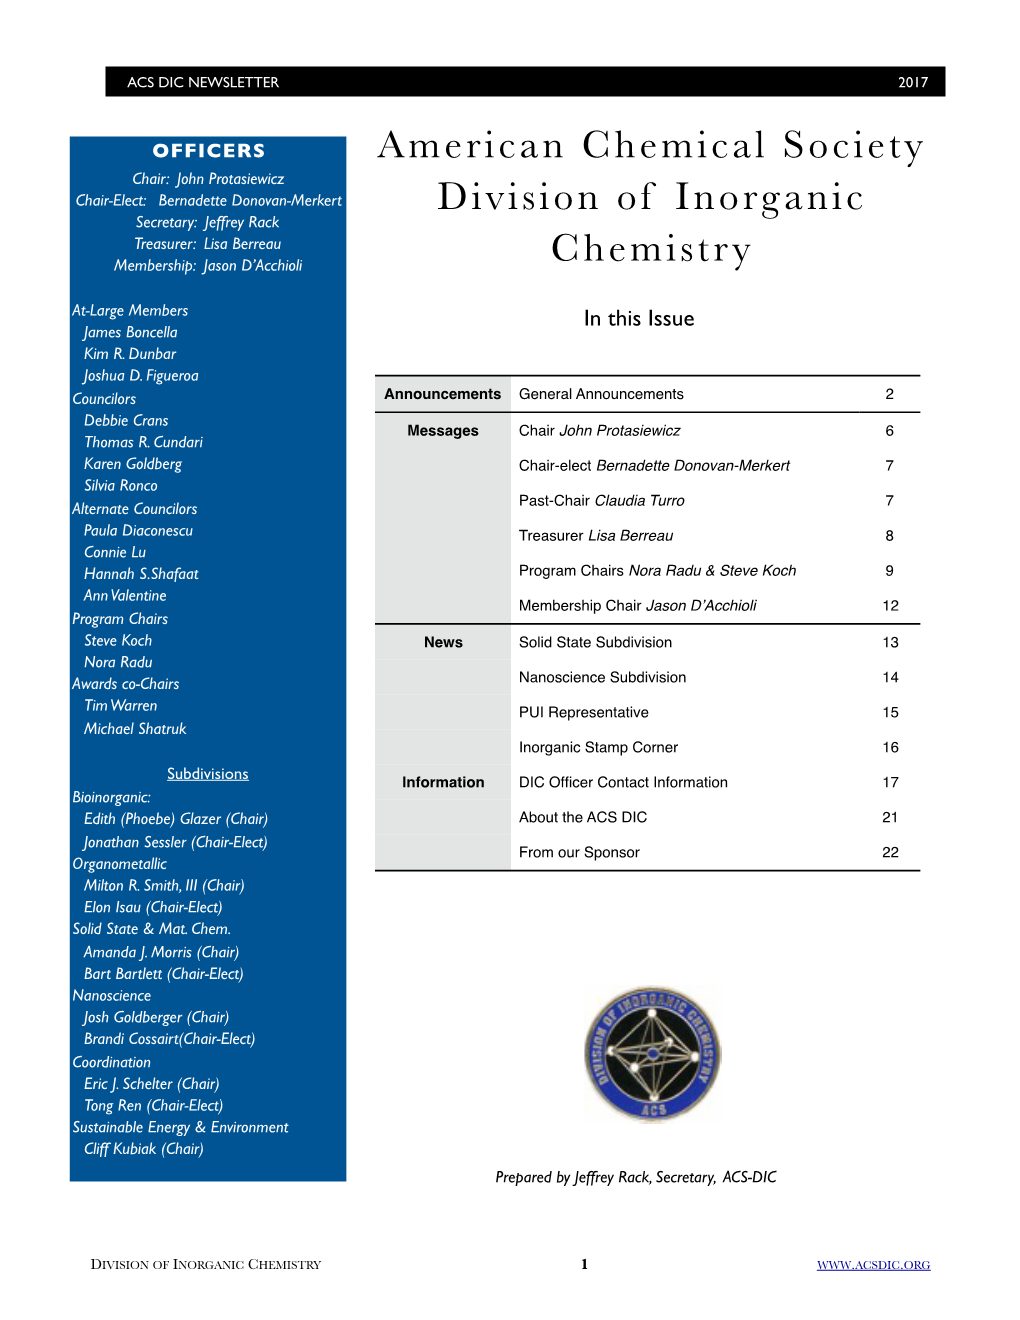 American Chemical Society Division of Inorganic Chemistry